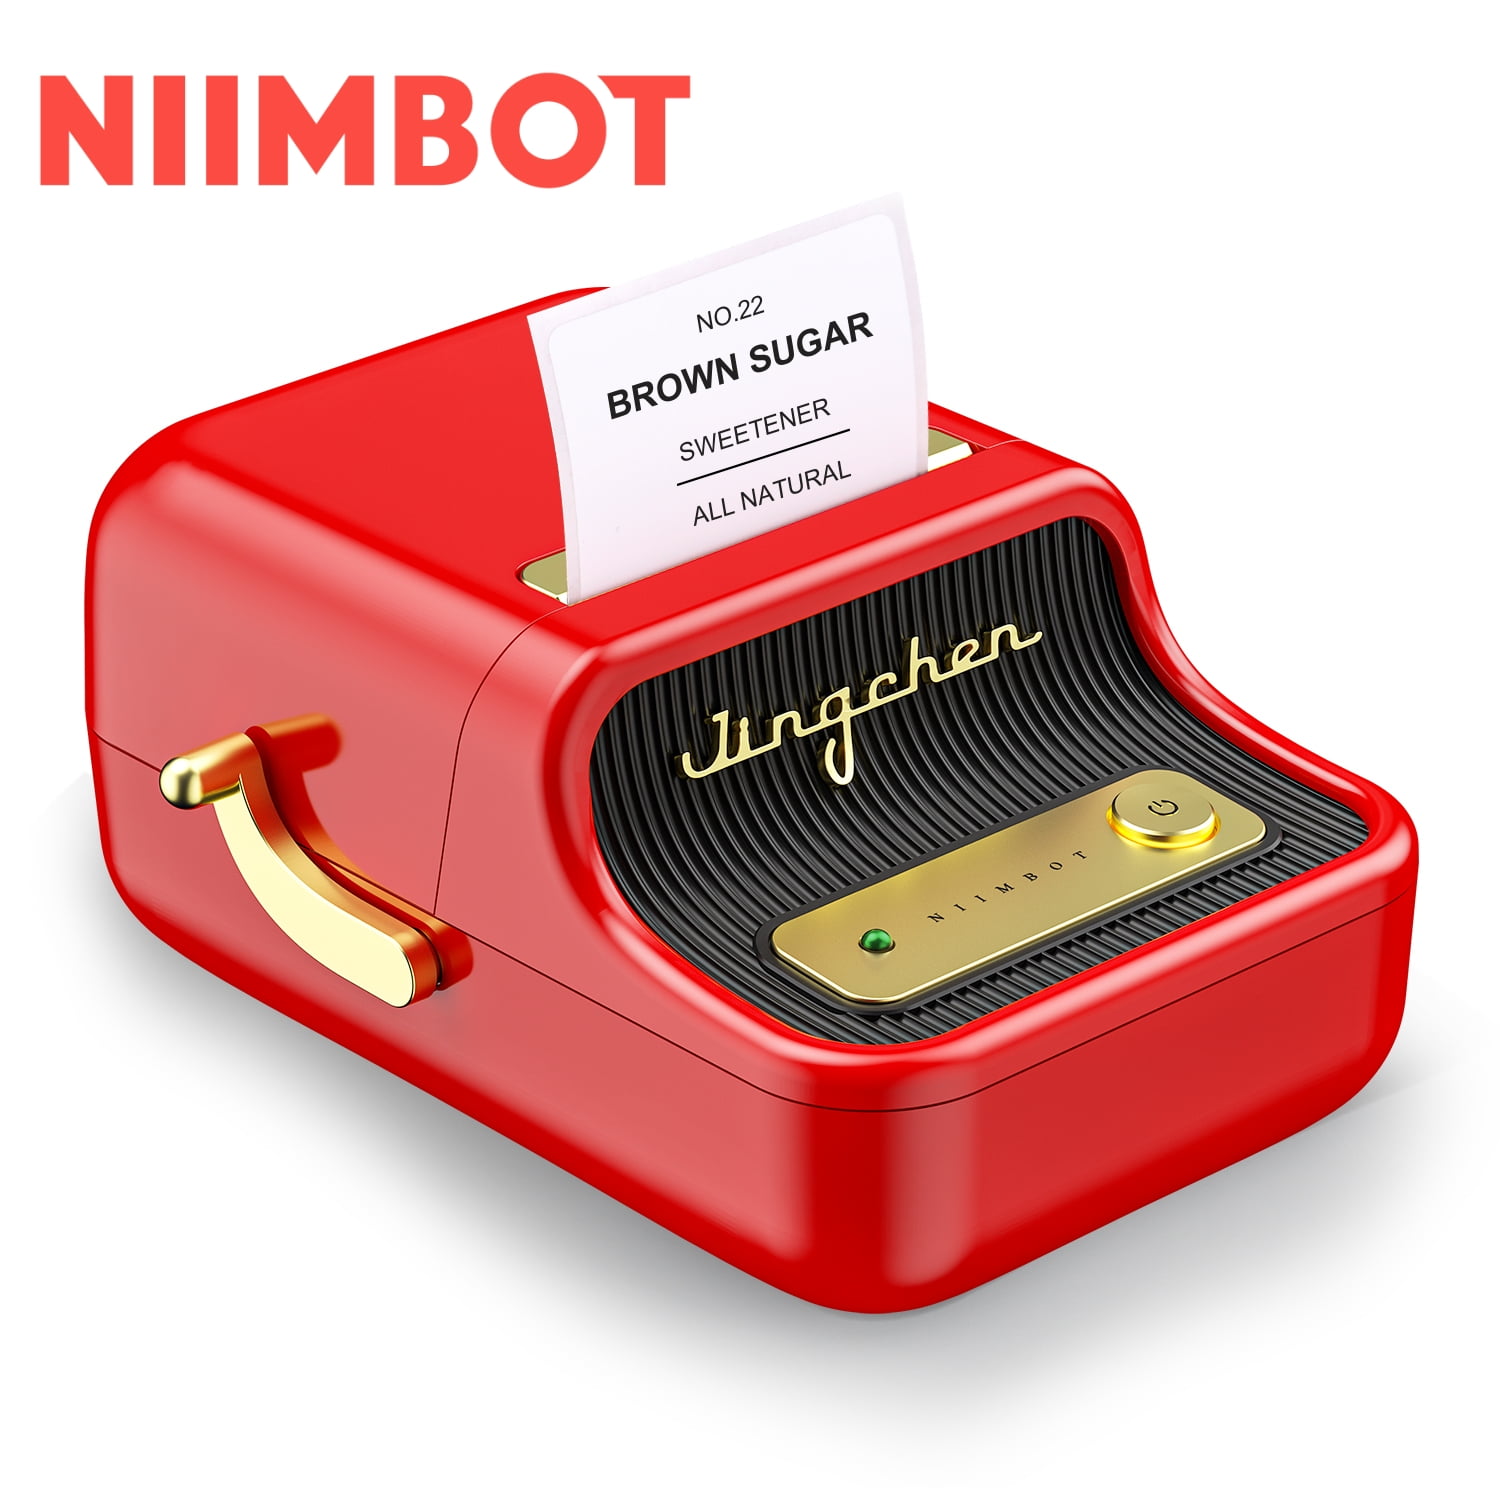 Niimbot B21 Label Maker!, Gallery posted by DIYrUs